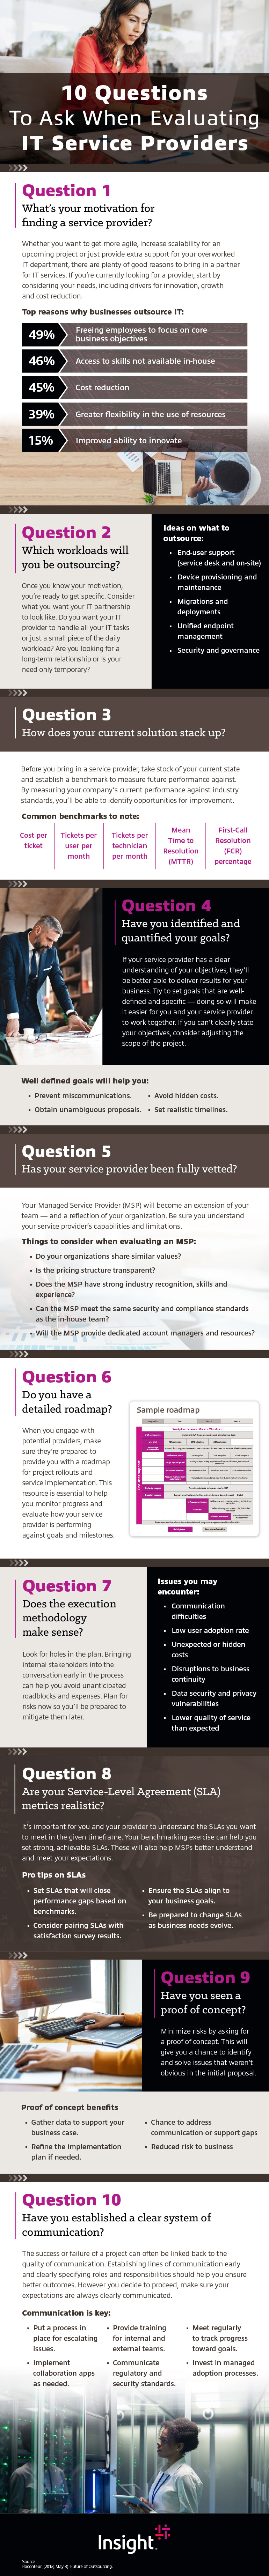 Infographic displaying 10 Questions To Ask When Evaluating IT Service Providers. Translated below.